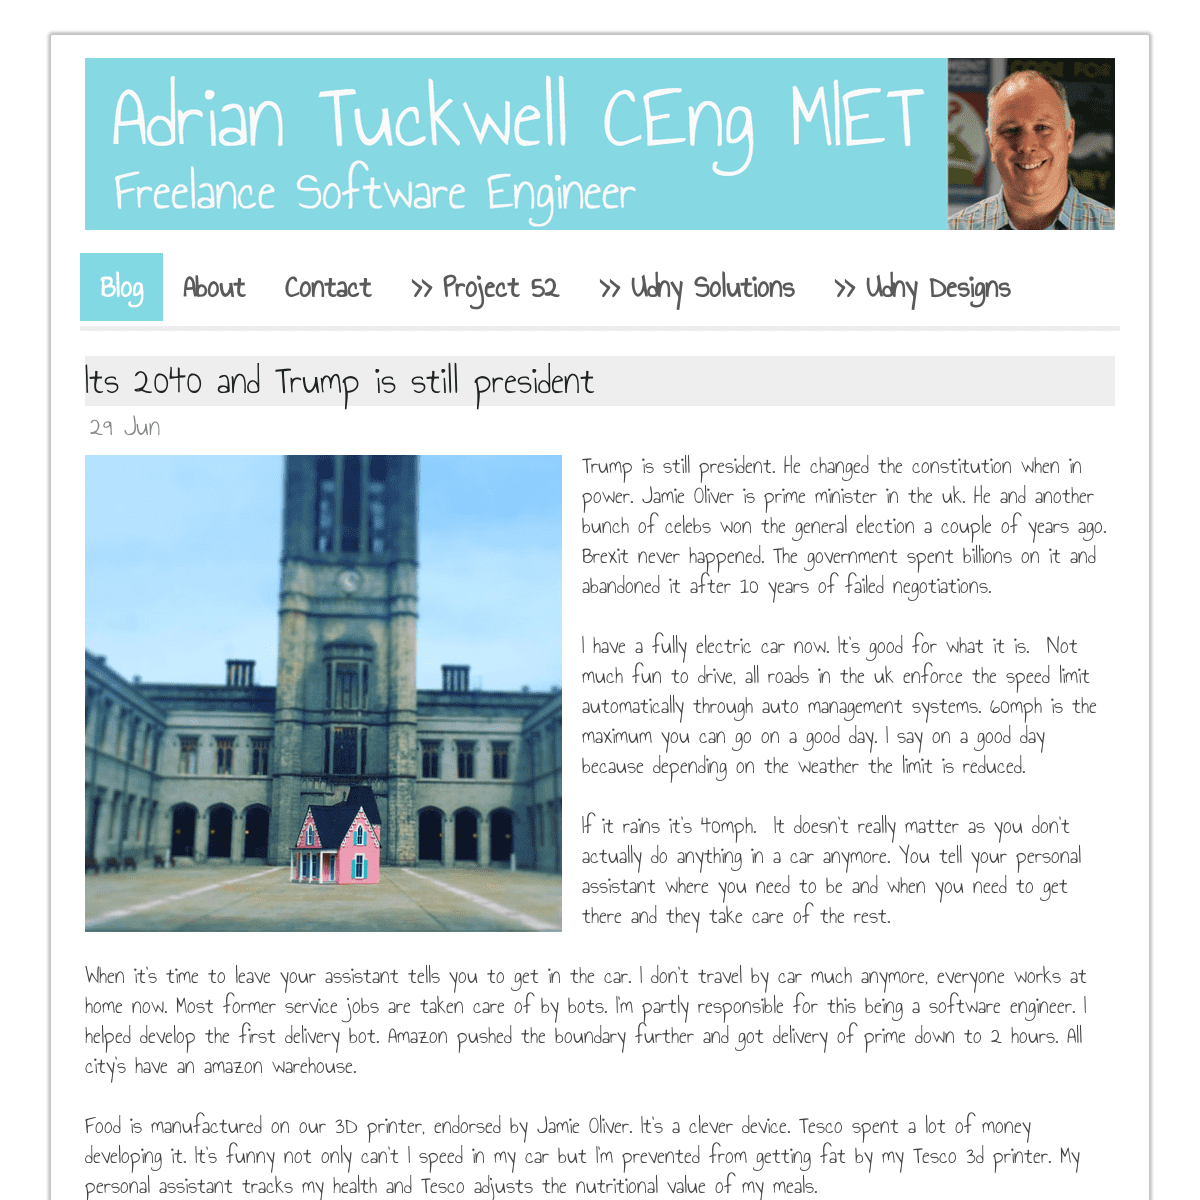 Software Engineer - Adrian Tuckwell CEng MIET - Chartered Engineer